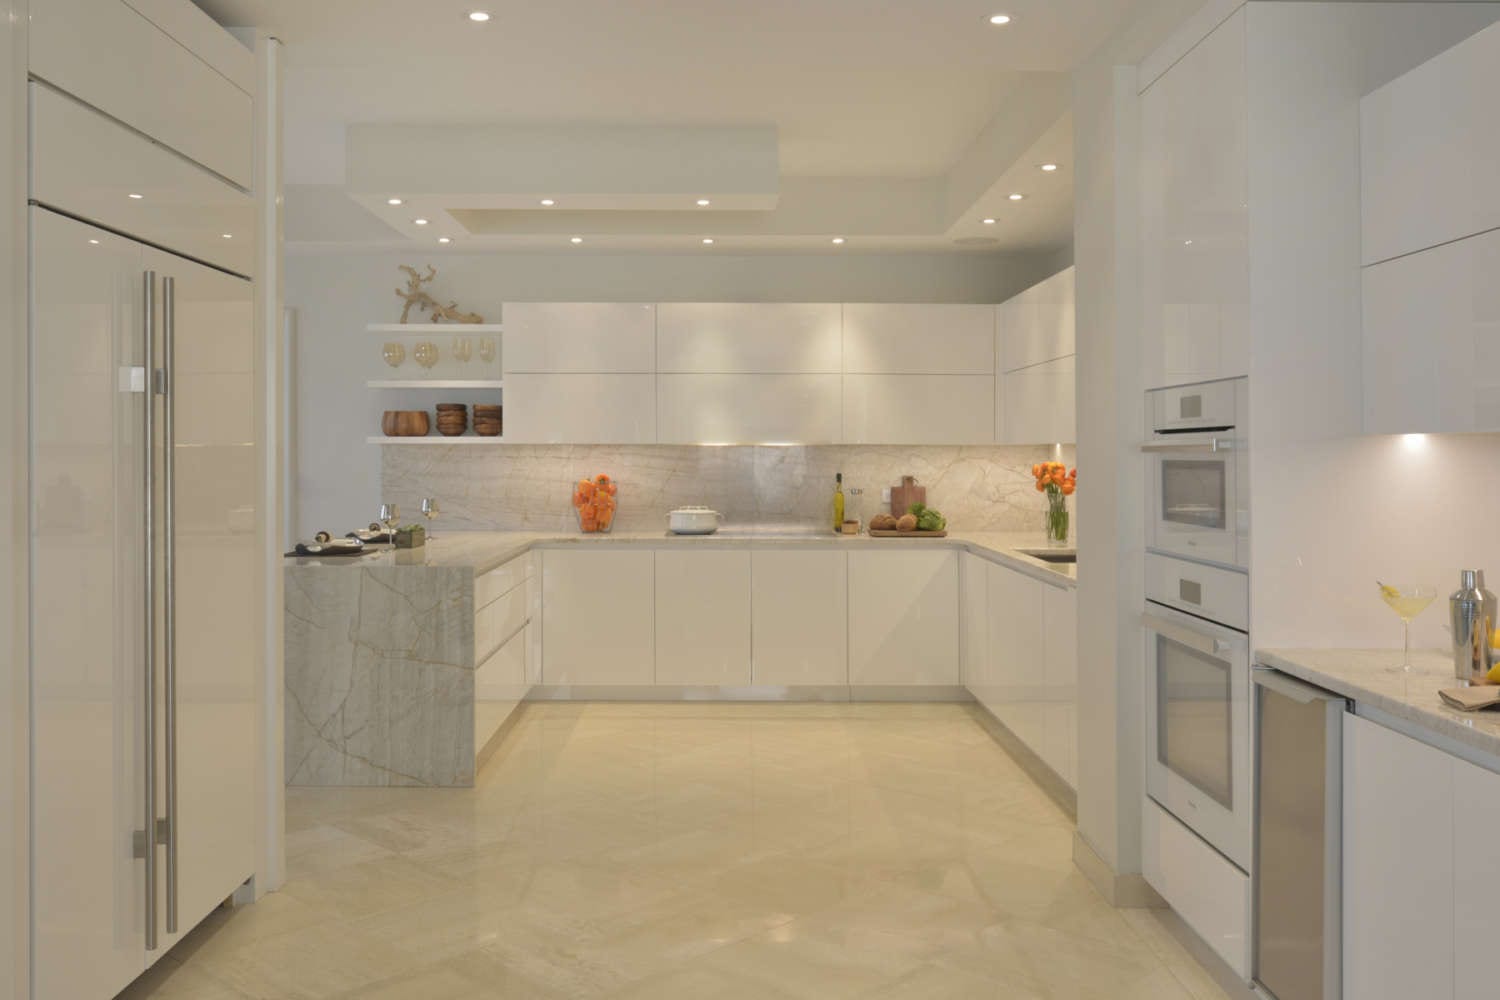 U-shaped kitchen is designed with soft lighting and a palette of warm whites. The fully custom cabinets are ArtCraft flat panel, frameless in high gloss white, countertops and backsplash are light marble with veining, and the floor is a light porcelain tile. Open shelving is used for display.